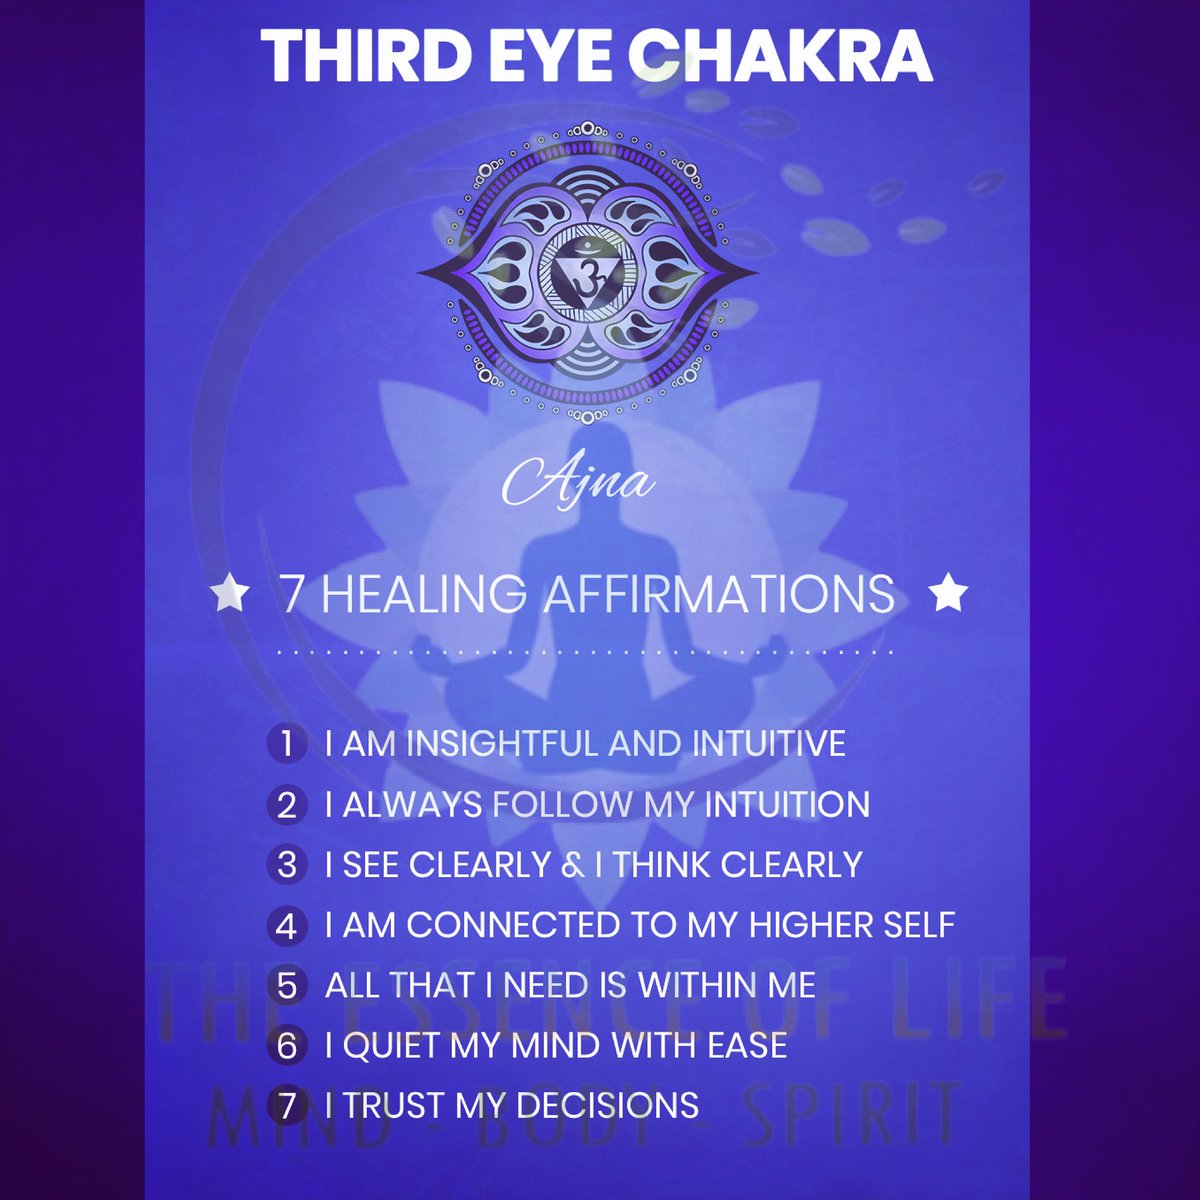 Open your third eye chakra with daily affirmations! Trust your intuition, connect with your higher self, and tap into infinite possibilities. #ChakraAffirmations #SpiritualGrowth #Mindfulness #ThirdEyeChakra